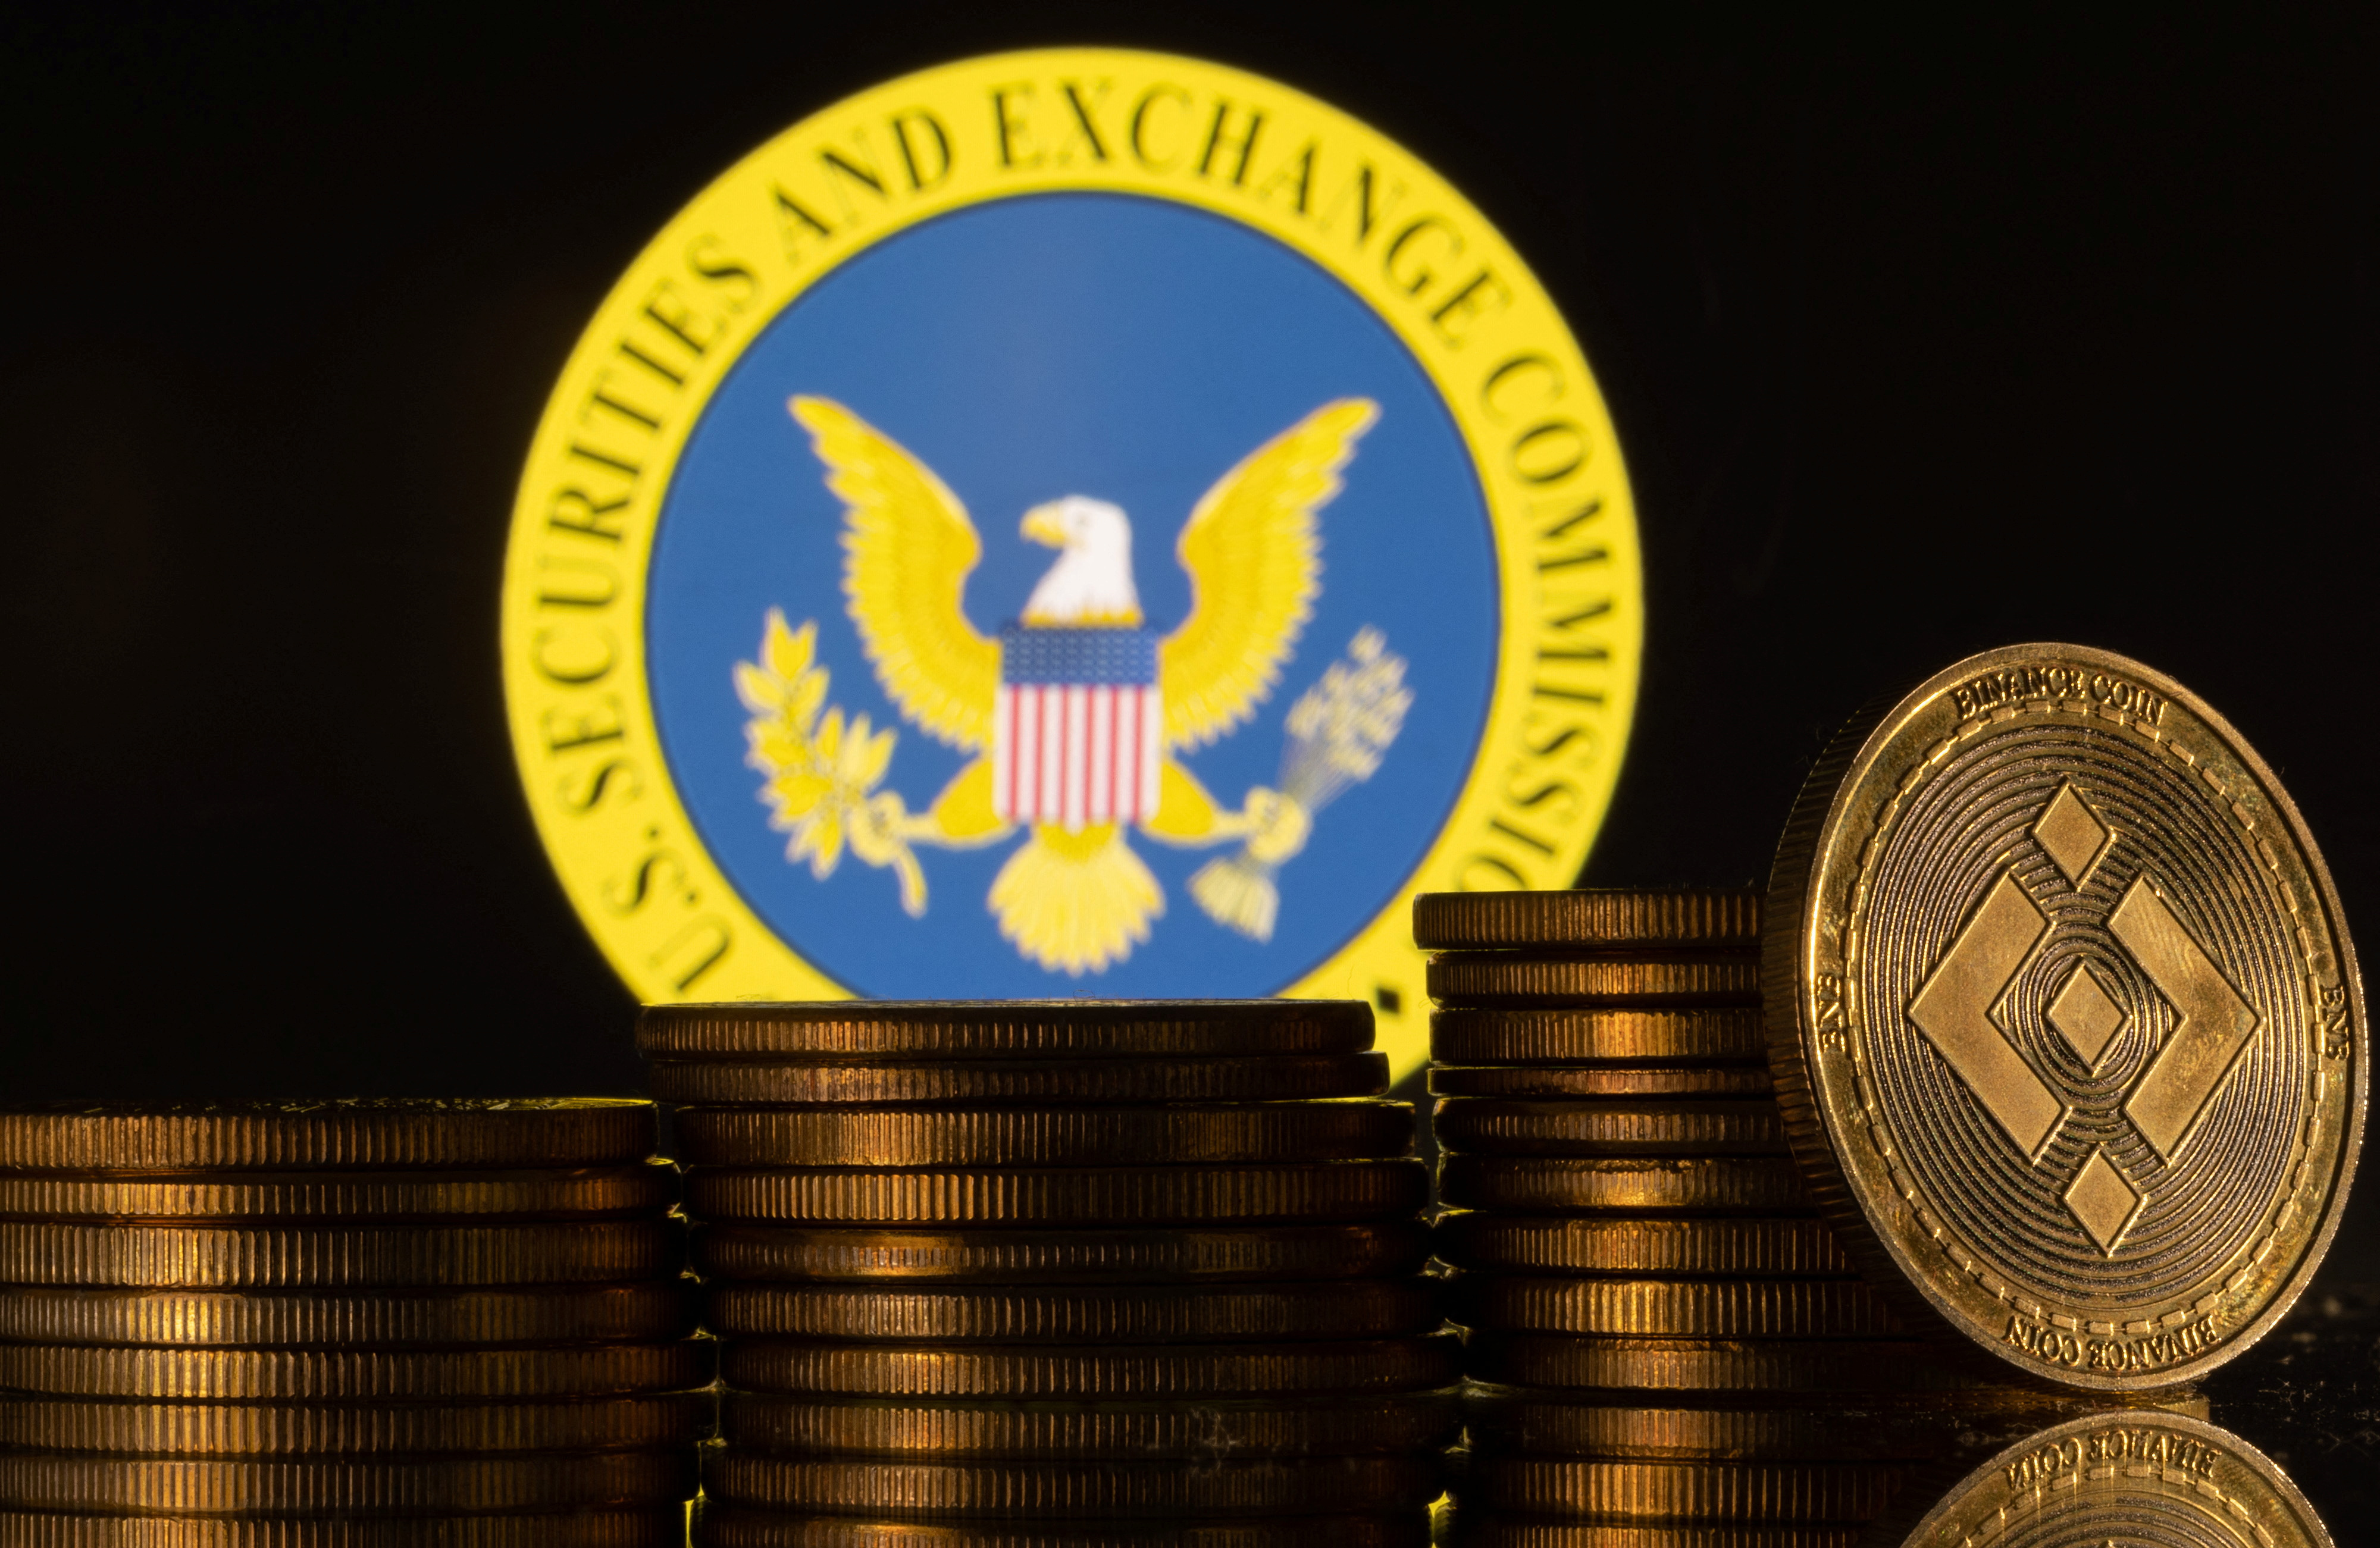 Illustration shows U.S. Securities and Exchange Commission logo and representations of cryptocurrency Binance